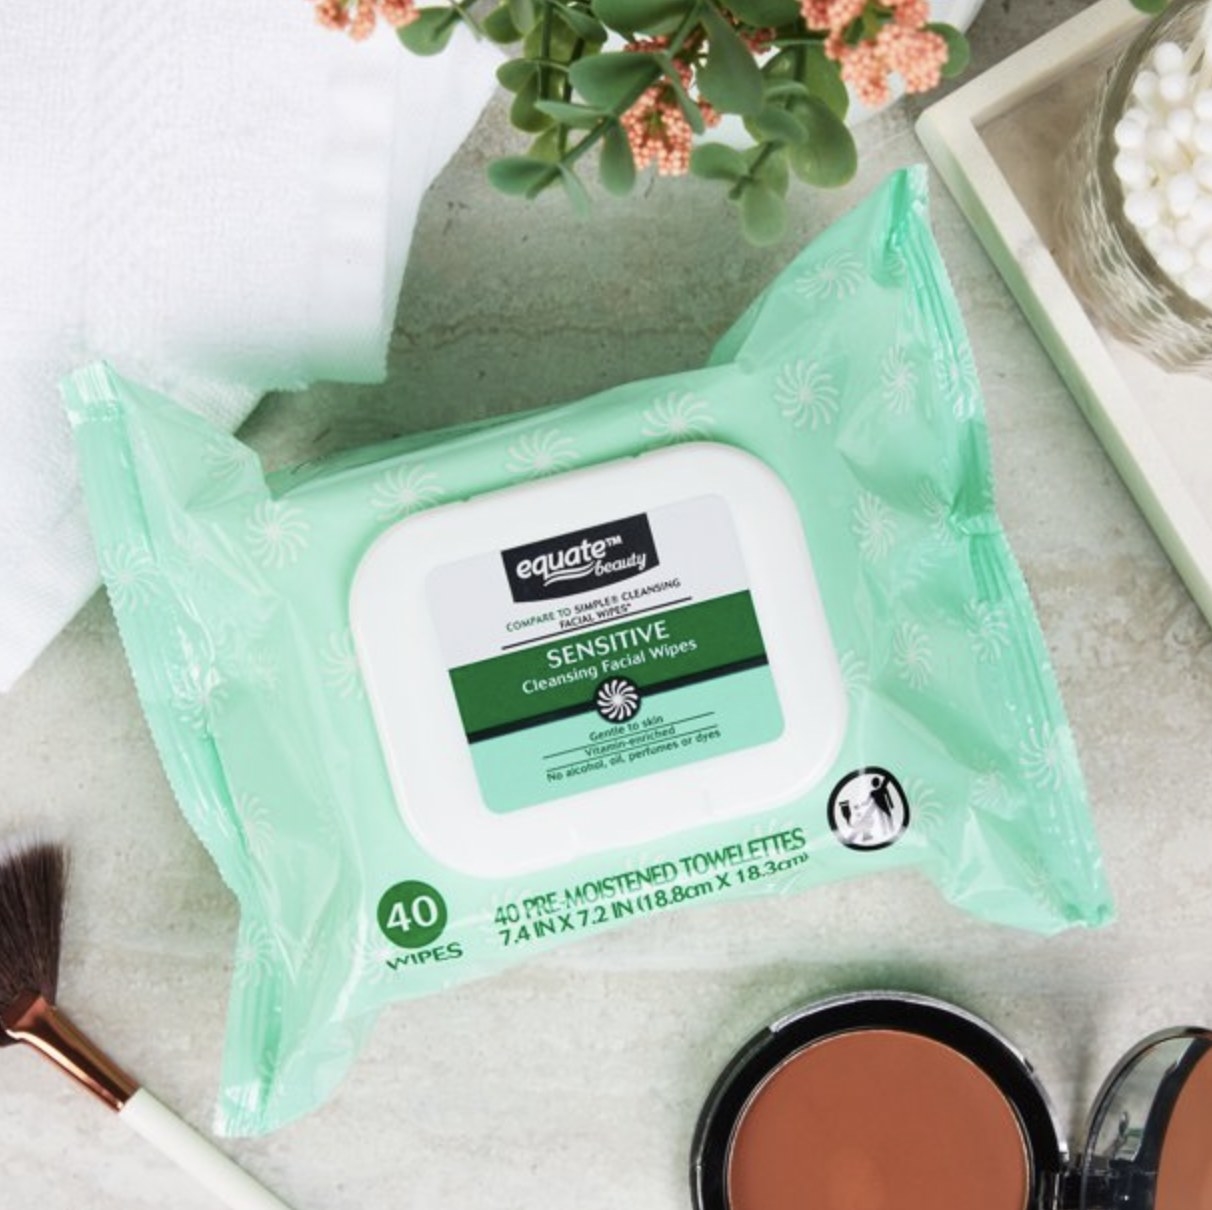 A package of sensitive facial wipes